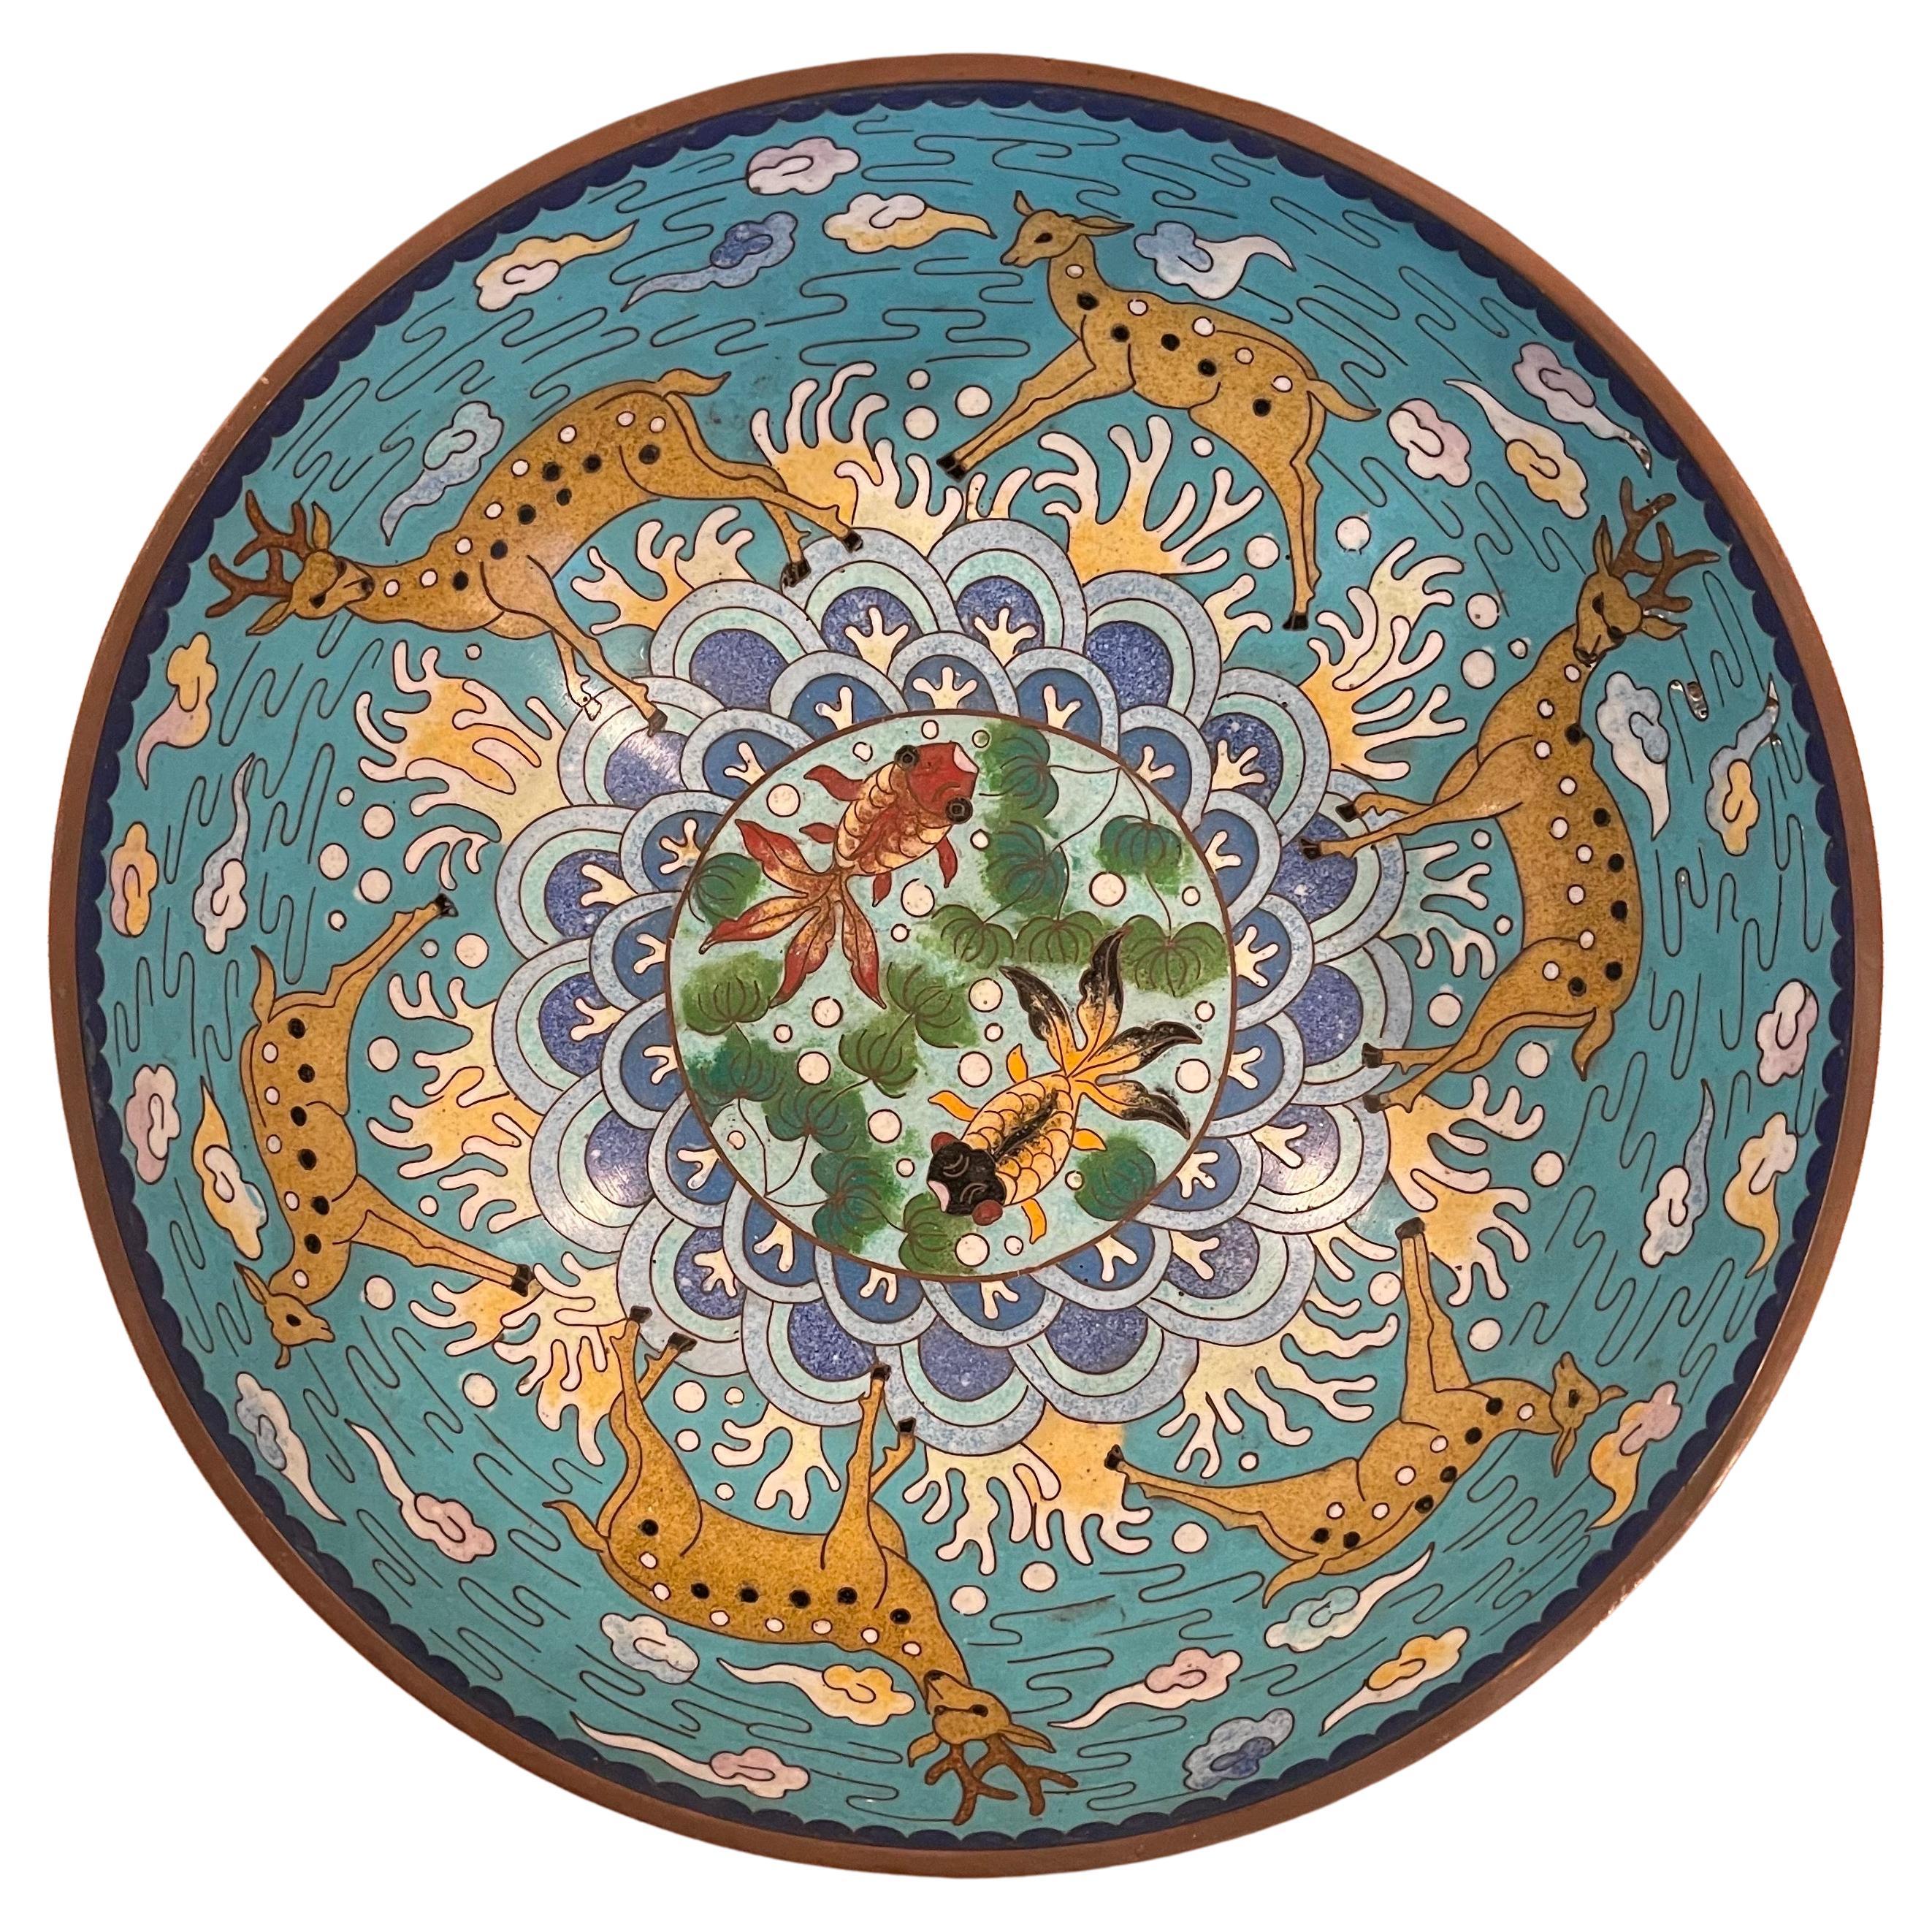 Vintage Chinese Cloisonné Bowl with Deer and Koi Motif